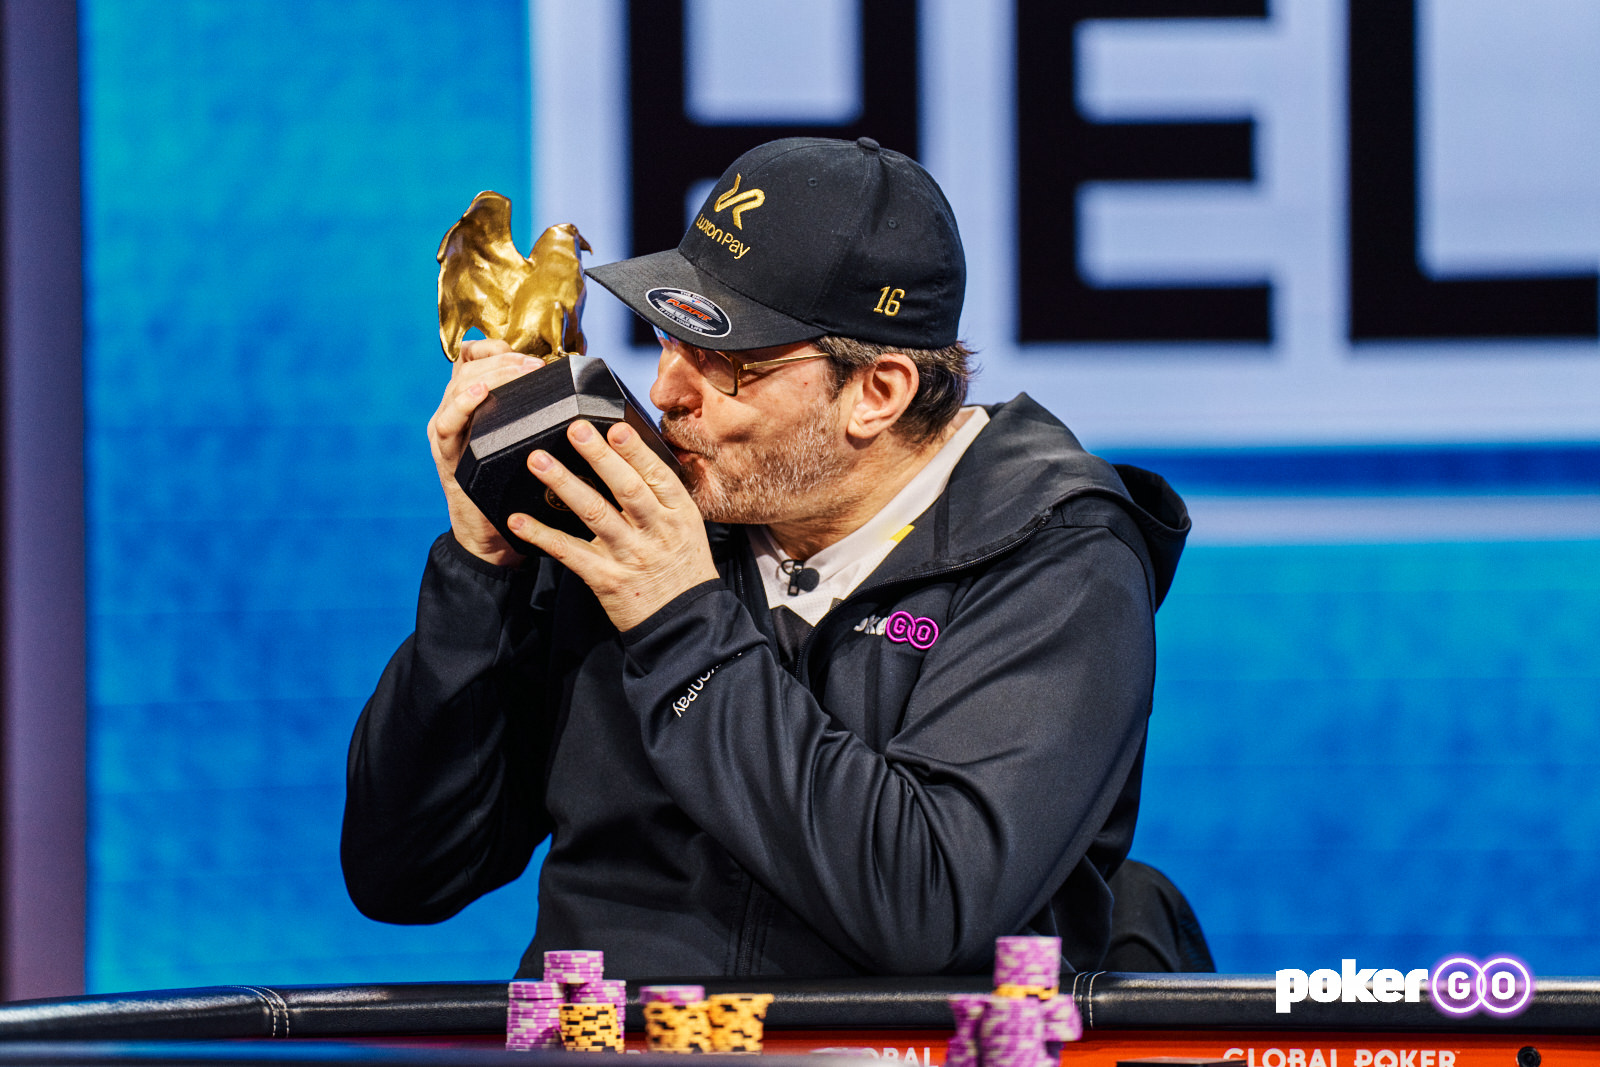 Phil Hellmuth’s Victory in the US Poker Open Dispels His Image as a One-Trick Pony